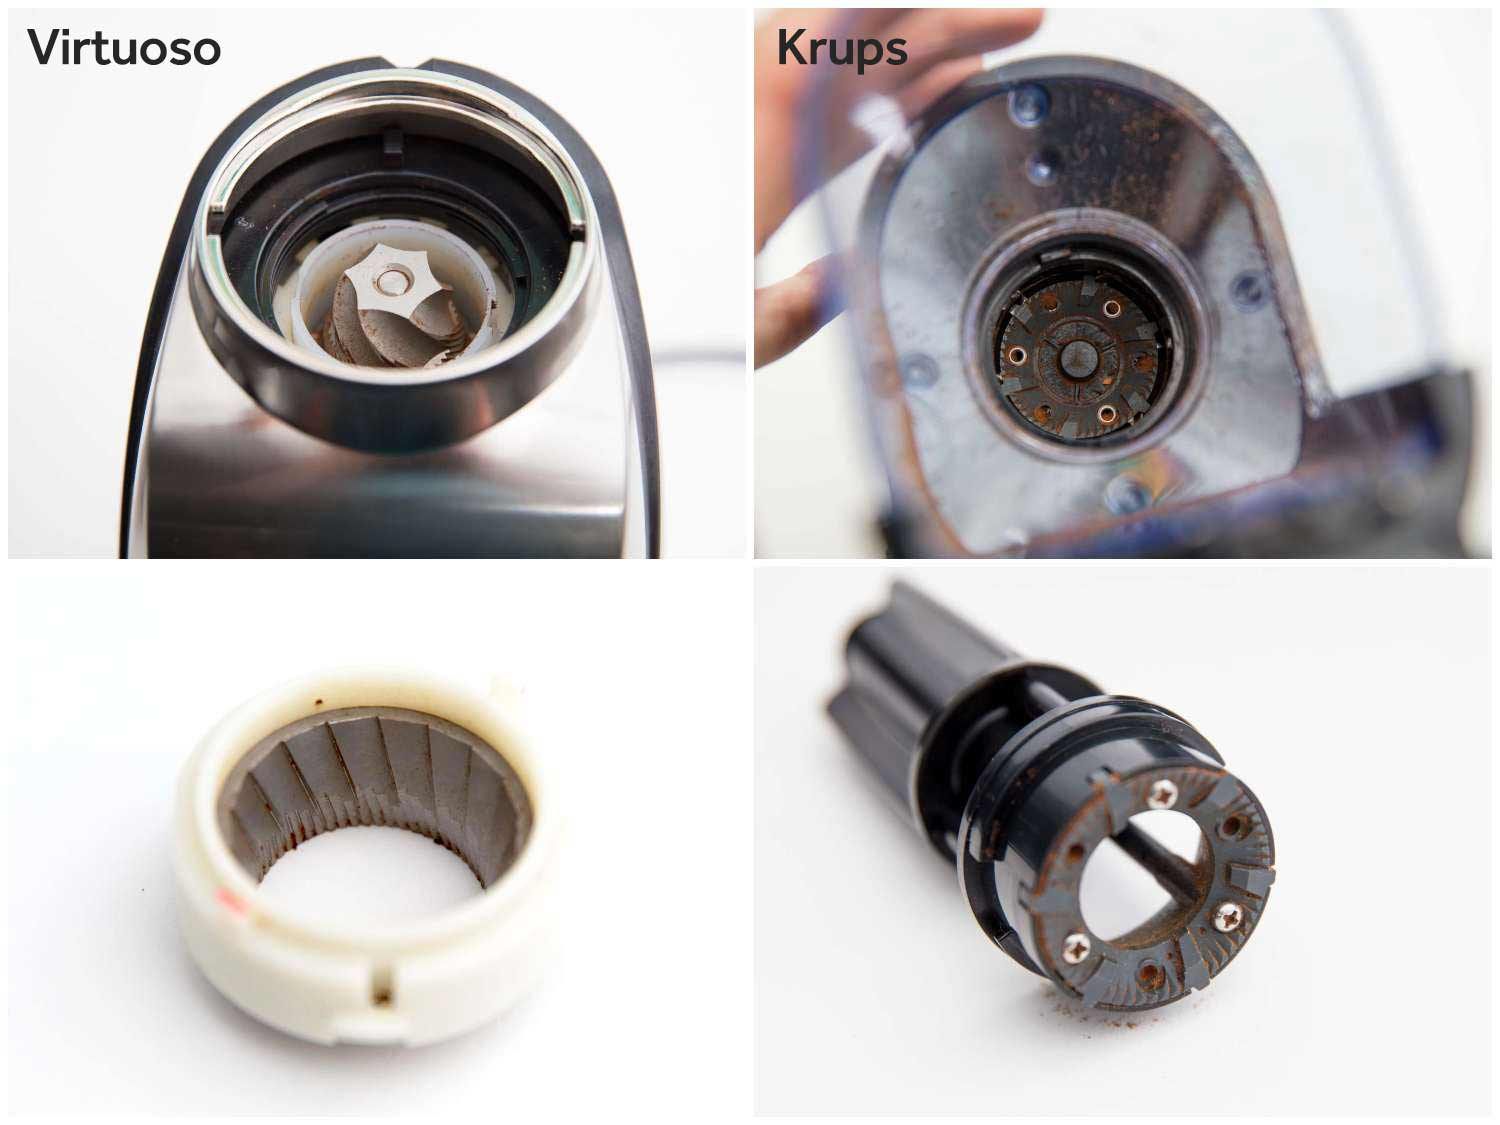 Comparison of the burrs from a Baratza Virtuoso coffee grinder and a much less expensive Krups one, showing the quality difference in the burrs themselves.